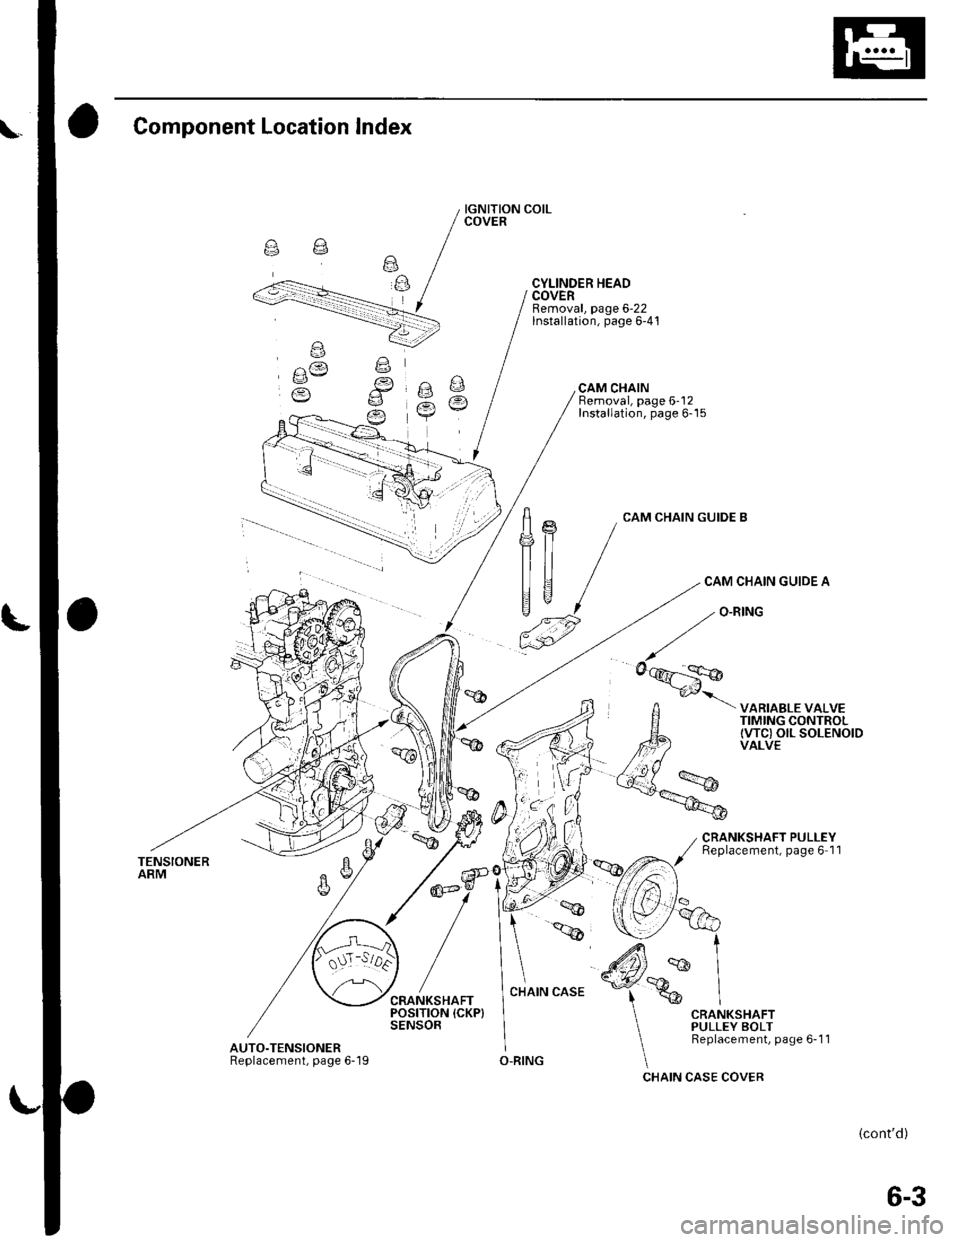 HONDA CIVIC 2003 7.G Owners Manual Component Location lndex
TENSIONERARM
AUTO.TENSIONERReplacement, page 6-l I
IGNITION COILCOVER
CYLINDER HEADCOVERRemoval, page 6-22lnstallation, page 6-41
CAM CHAINBemoval, page 6-12Installation, pa